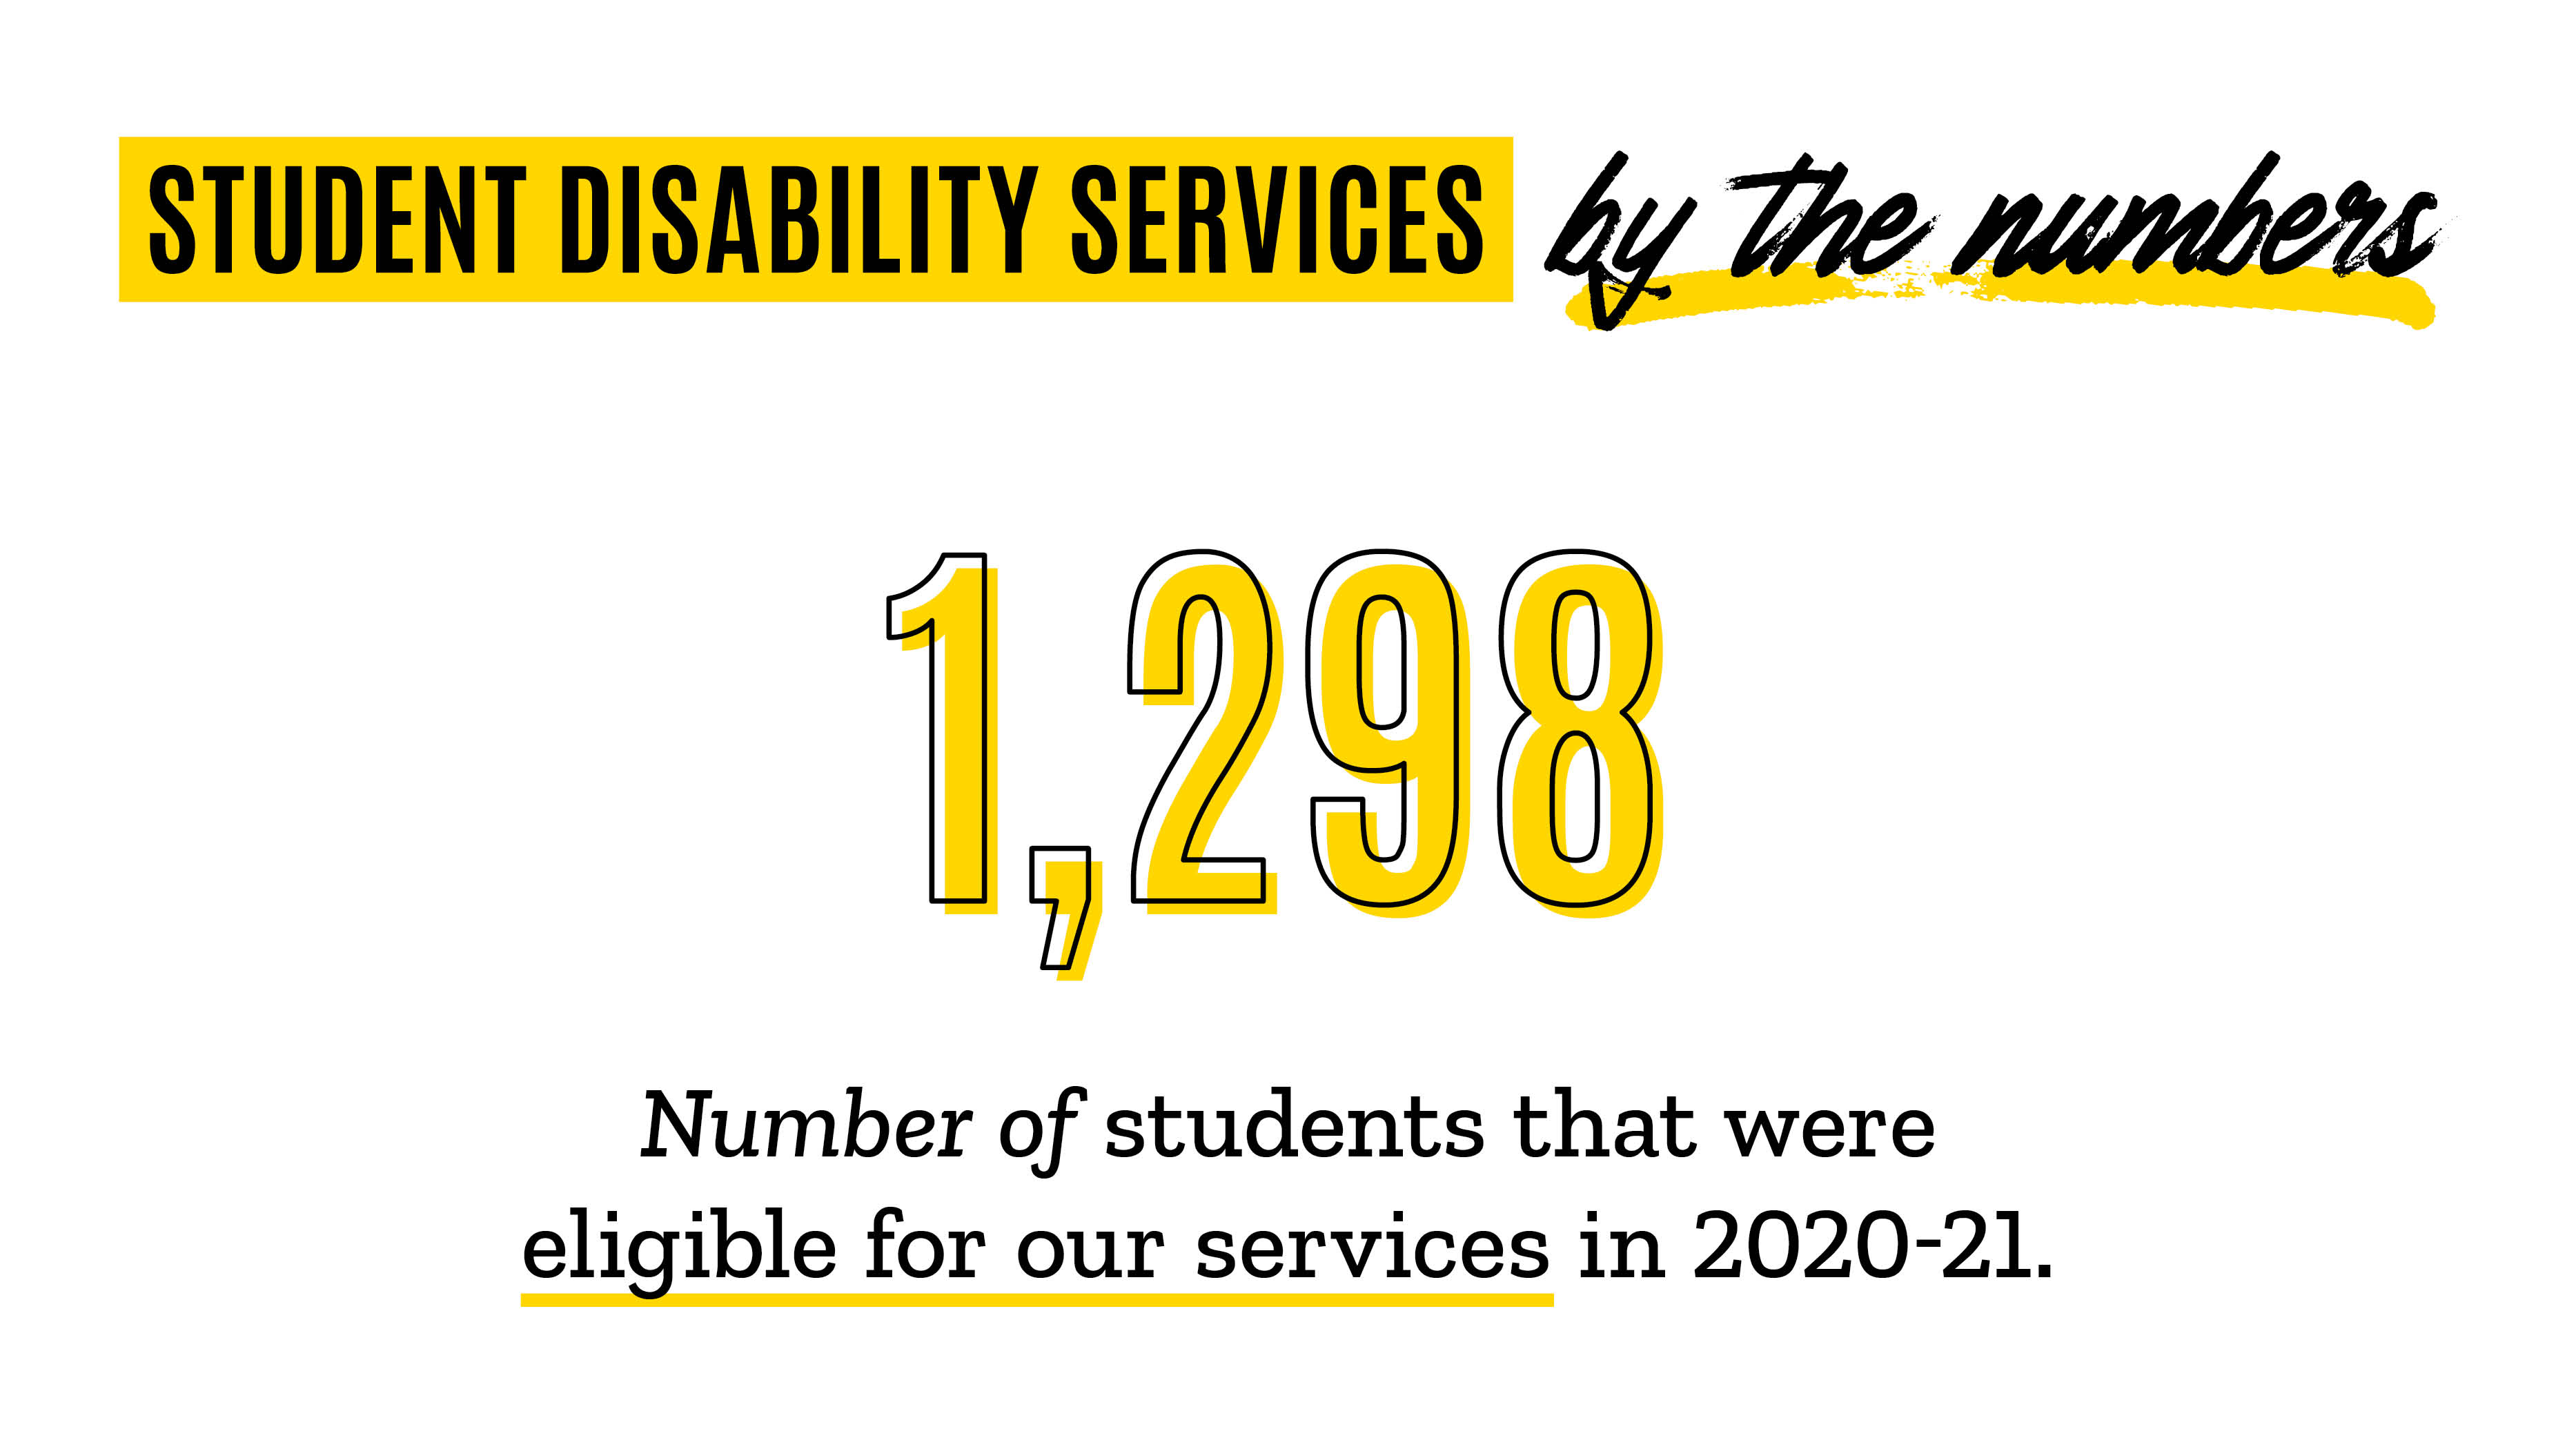 By the numbers 1,298 number of students that were eligible for our services in 2020-21